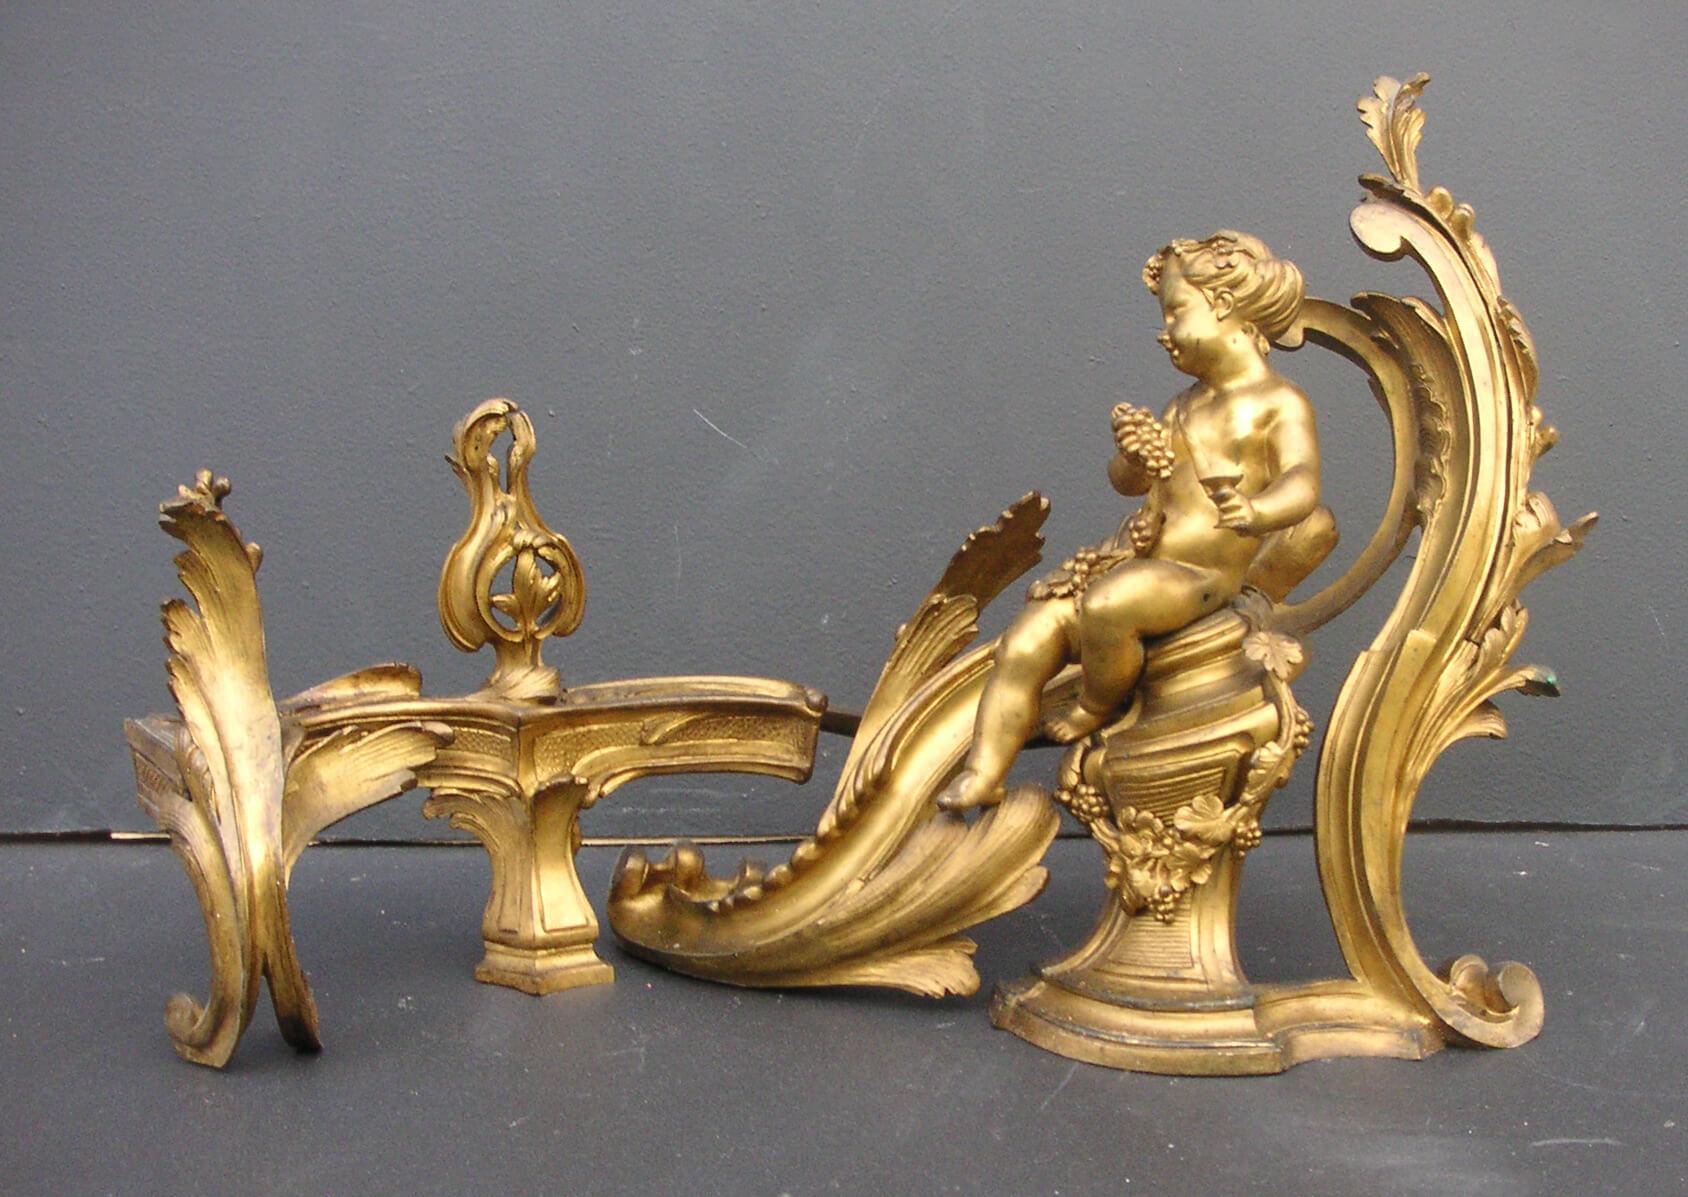 Pair of Louis XV 18th century brass chenets, very finely cast with scrolled foliage and swags, large putti holding grapes and vines. Exceptional quality.

Measures: Height: 370 mm 14